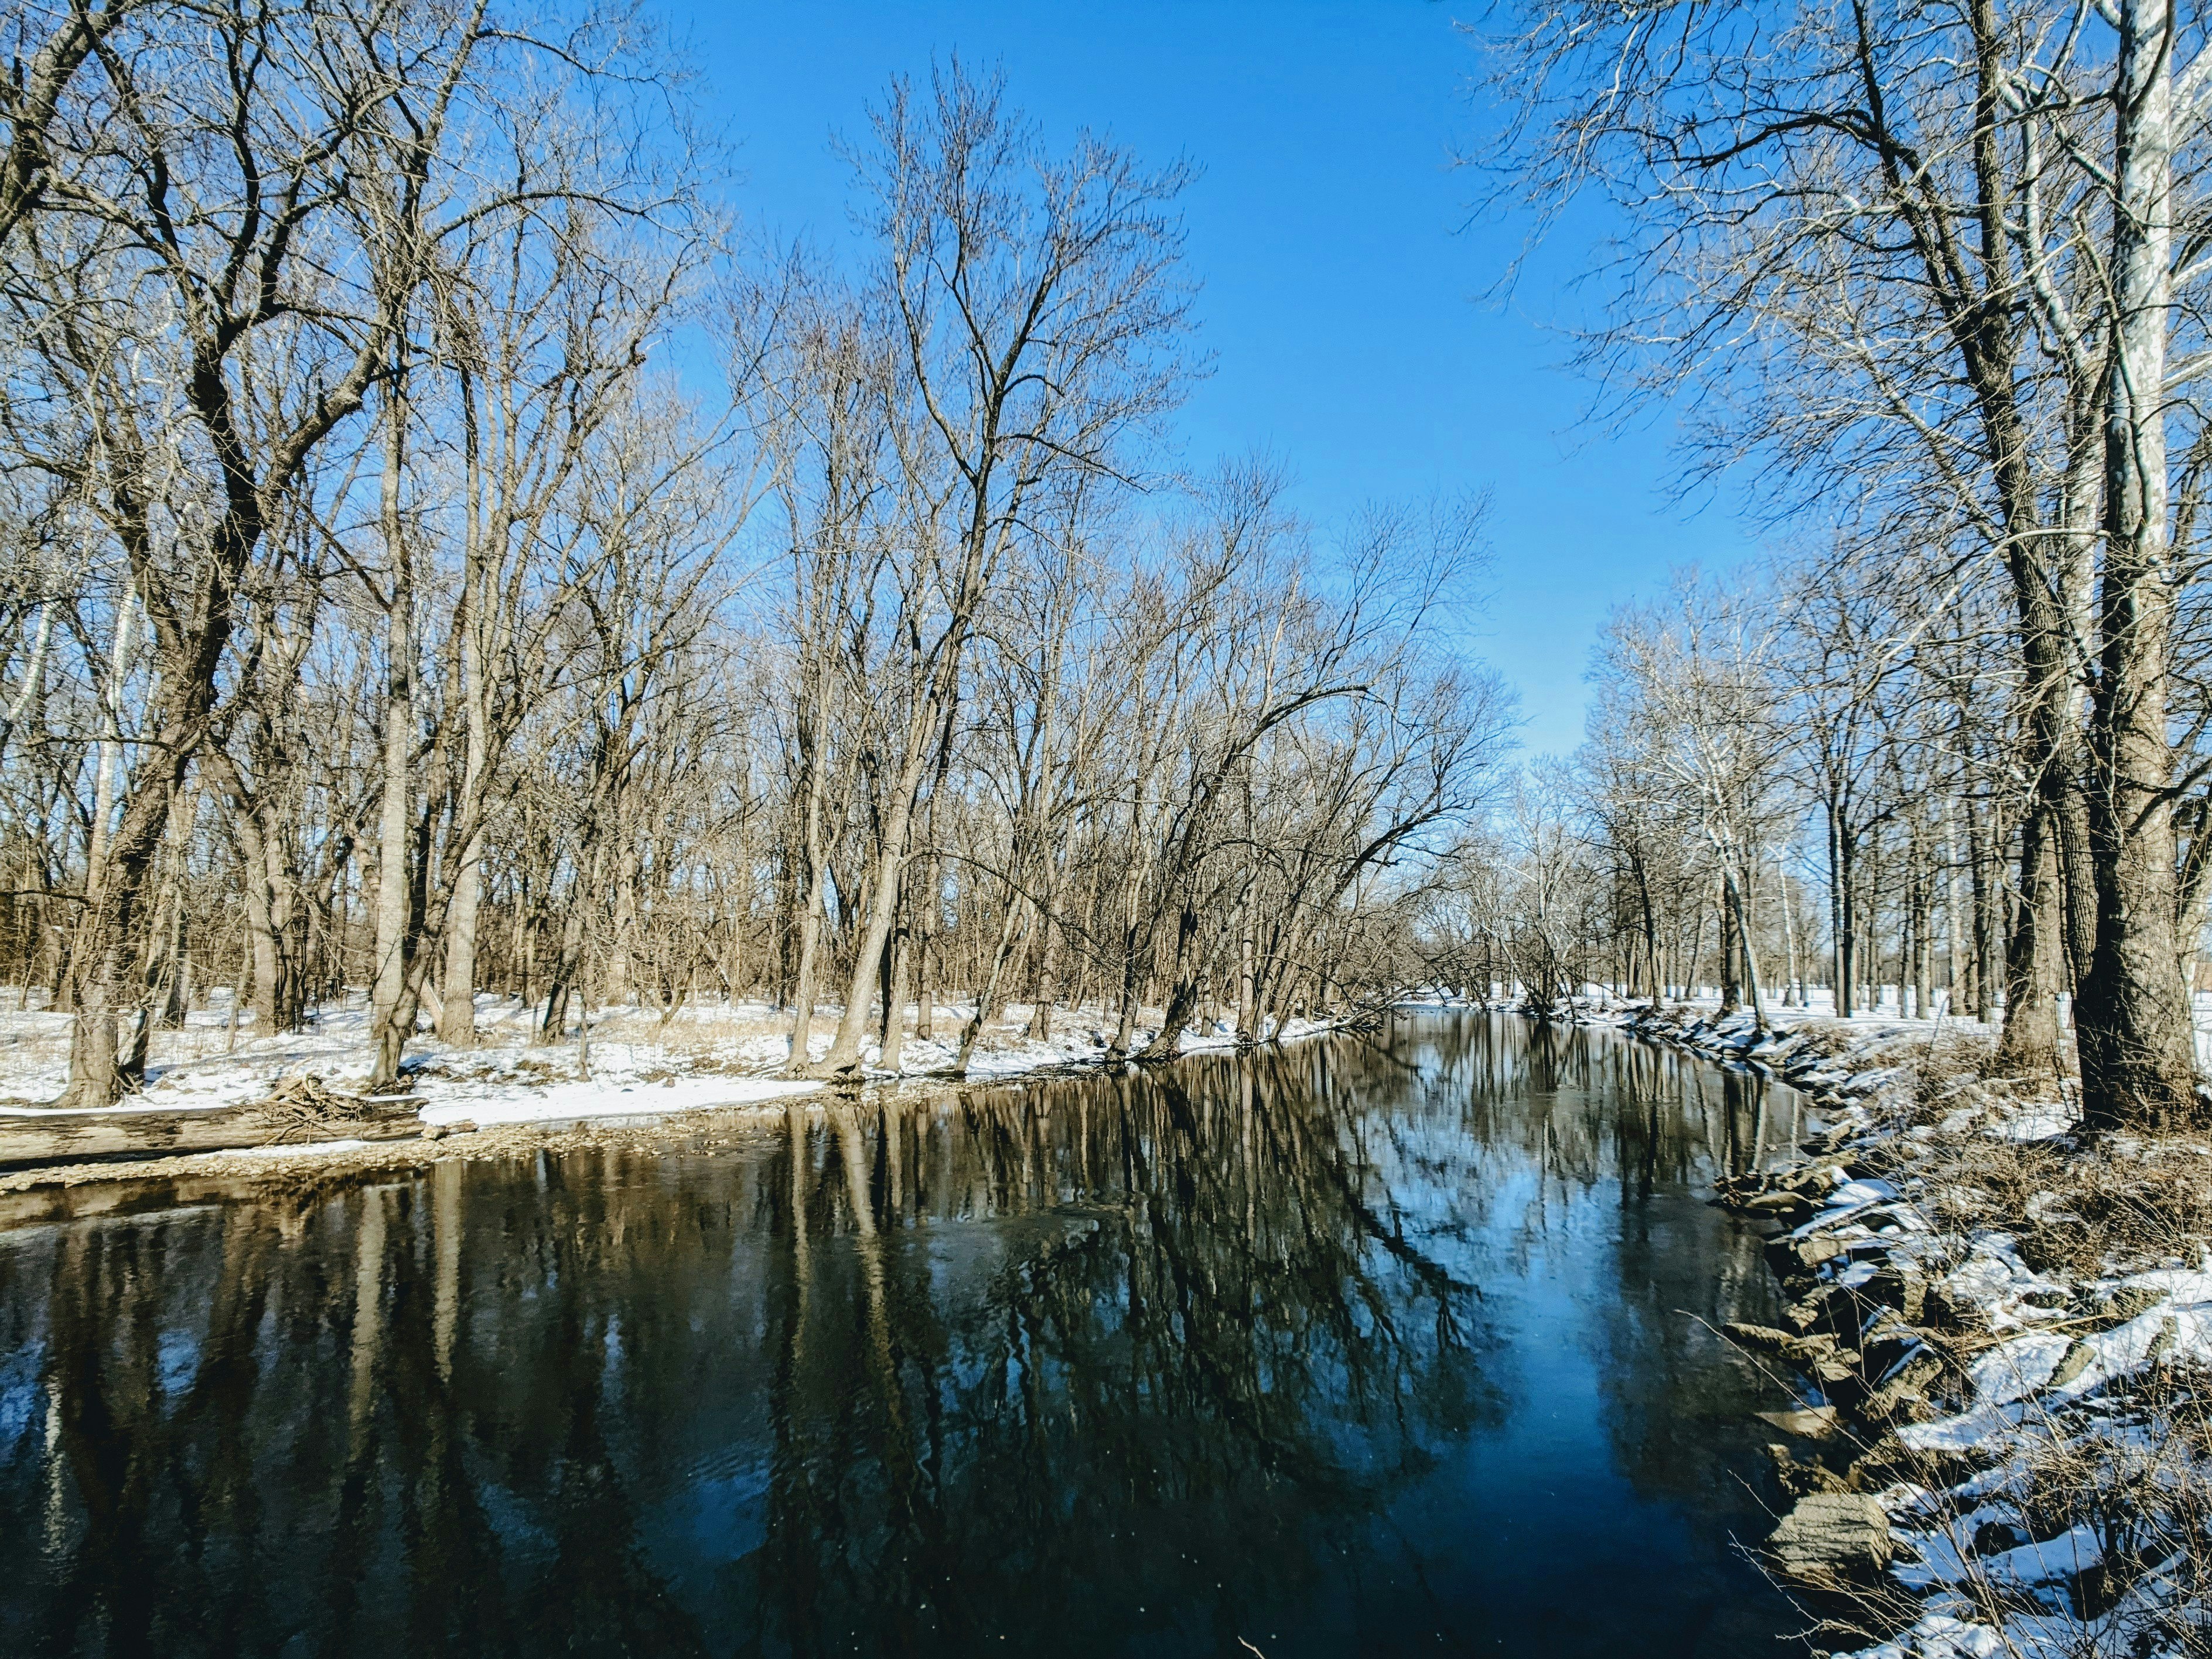 Snowy river banks on a winter day